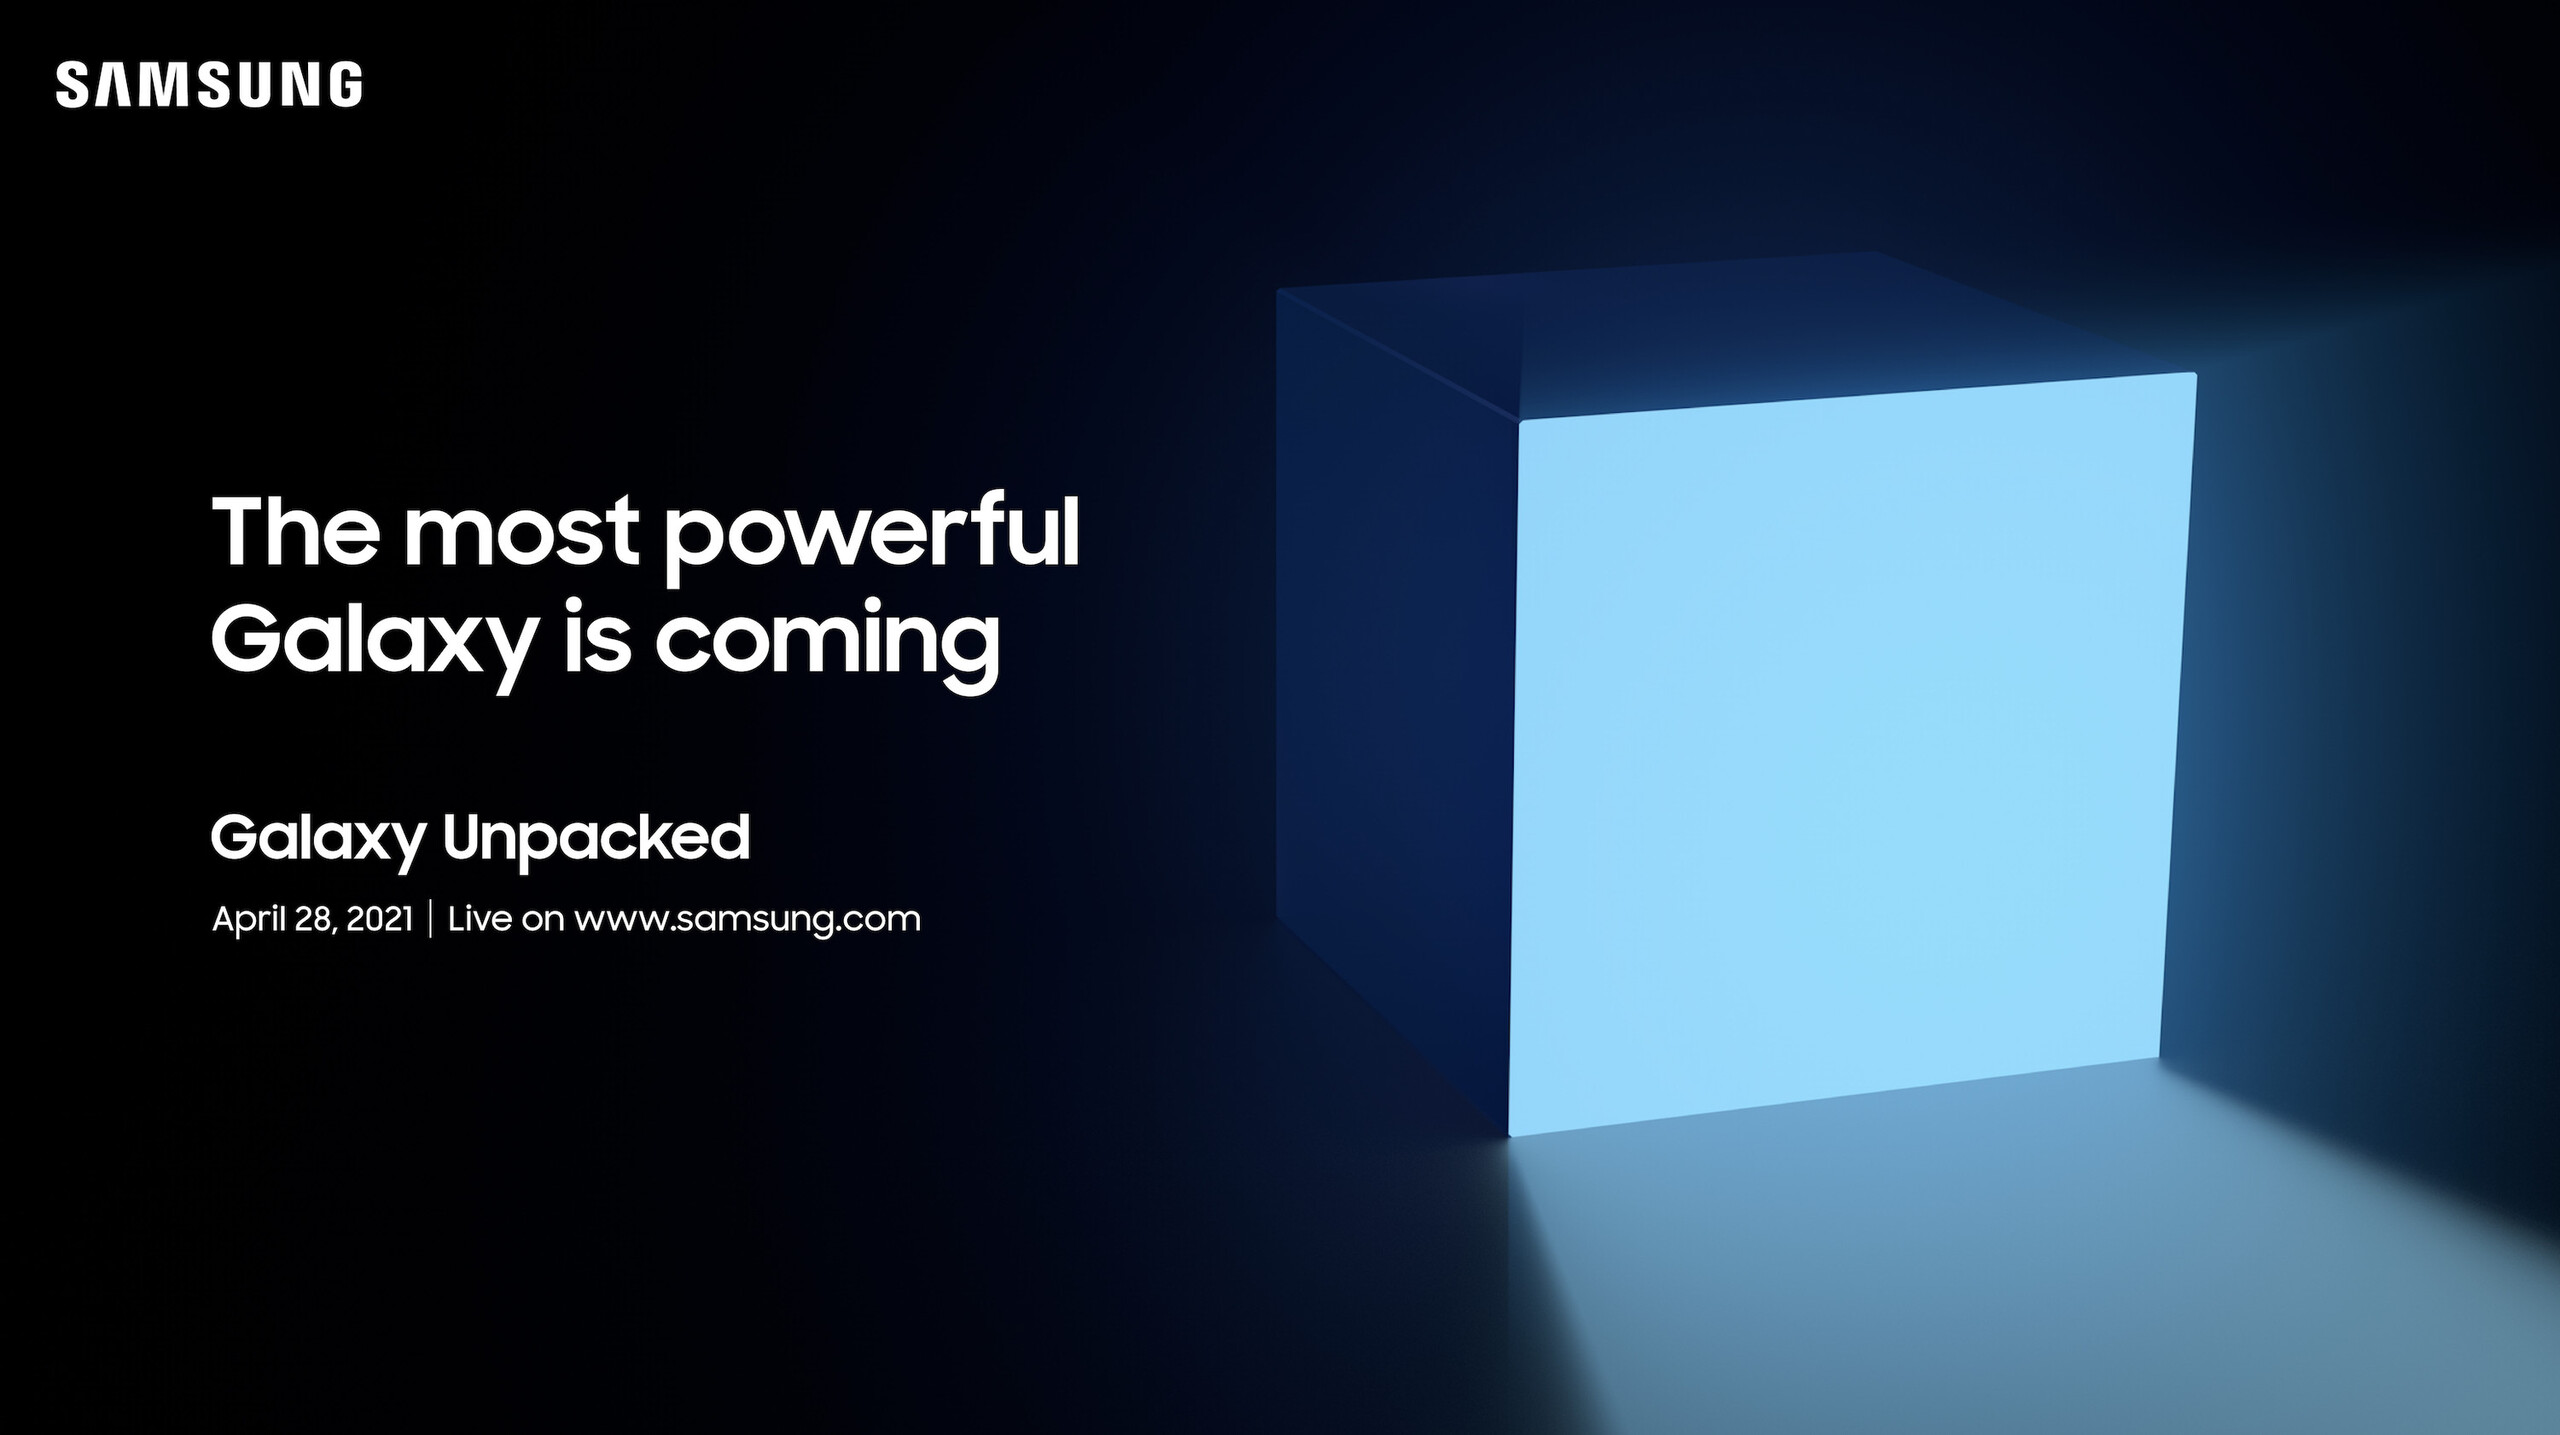 New Samsung Unpacked event teases "the most powerful Galaxy is coming